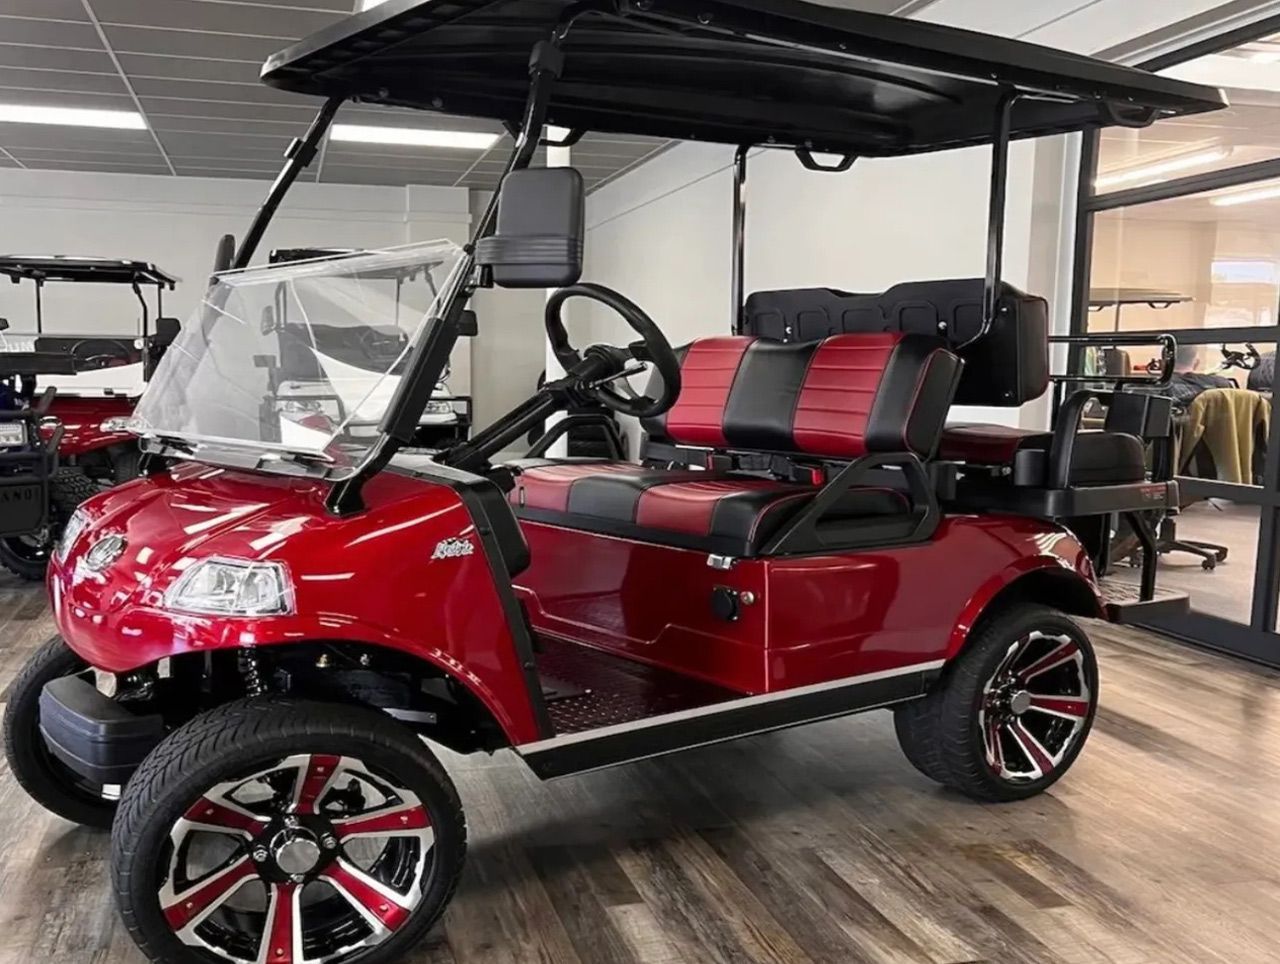 A red golf cart is parked in a showroom